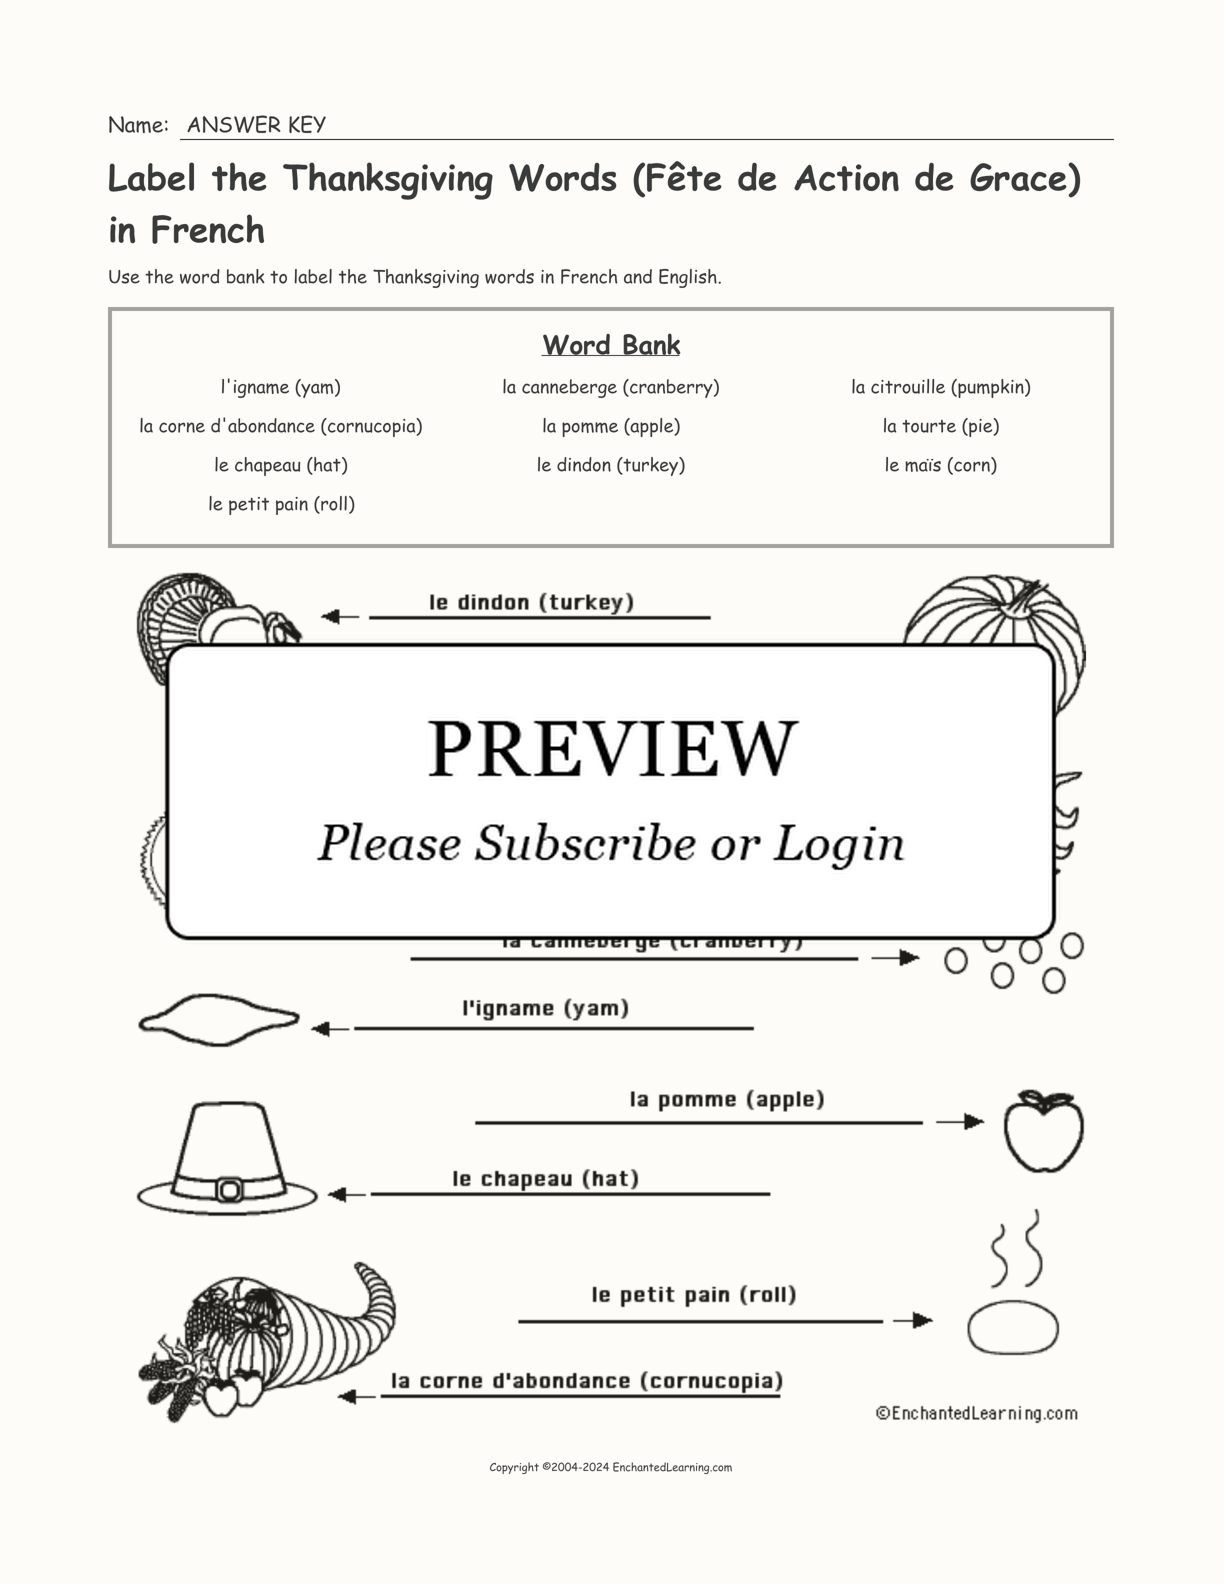 Label the Thanksgiving Words (Fête de Action de Grace) in French interactive worksheet page 2